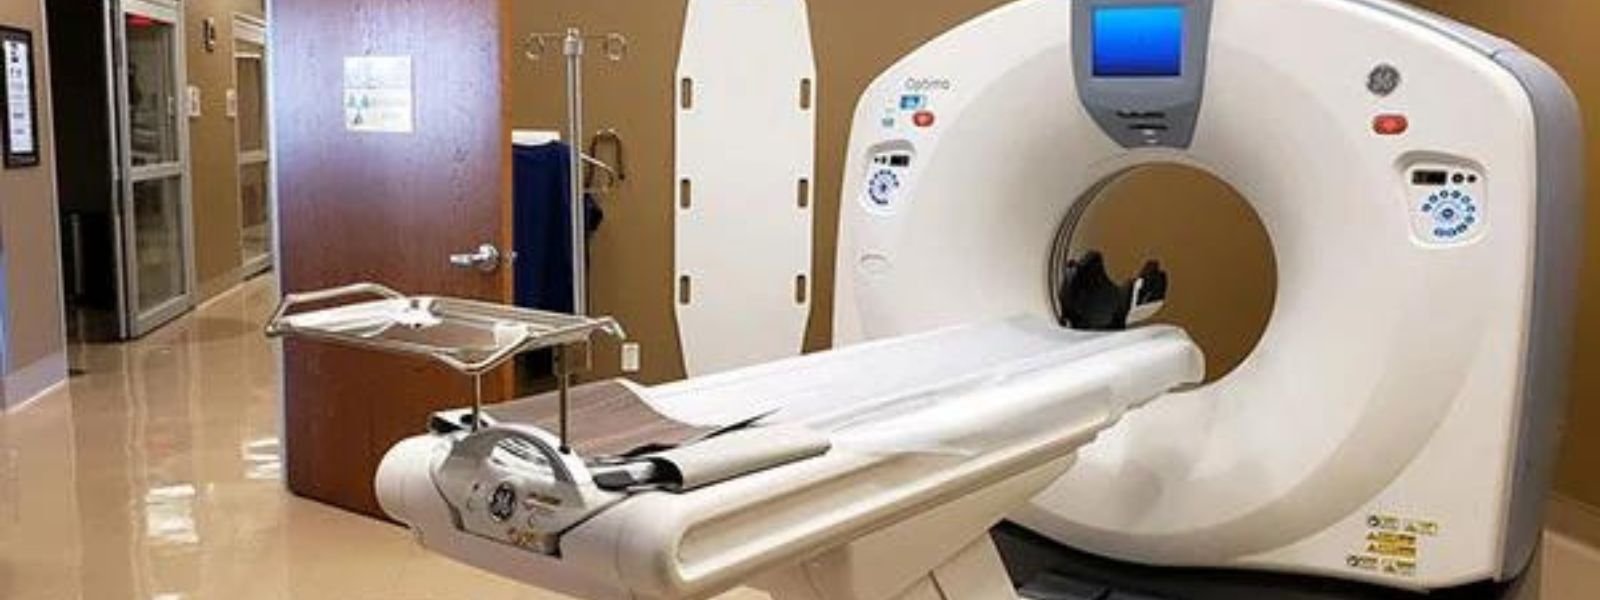 CT Scans malfunction across several govt hospitals